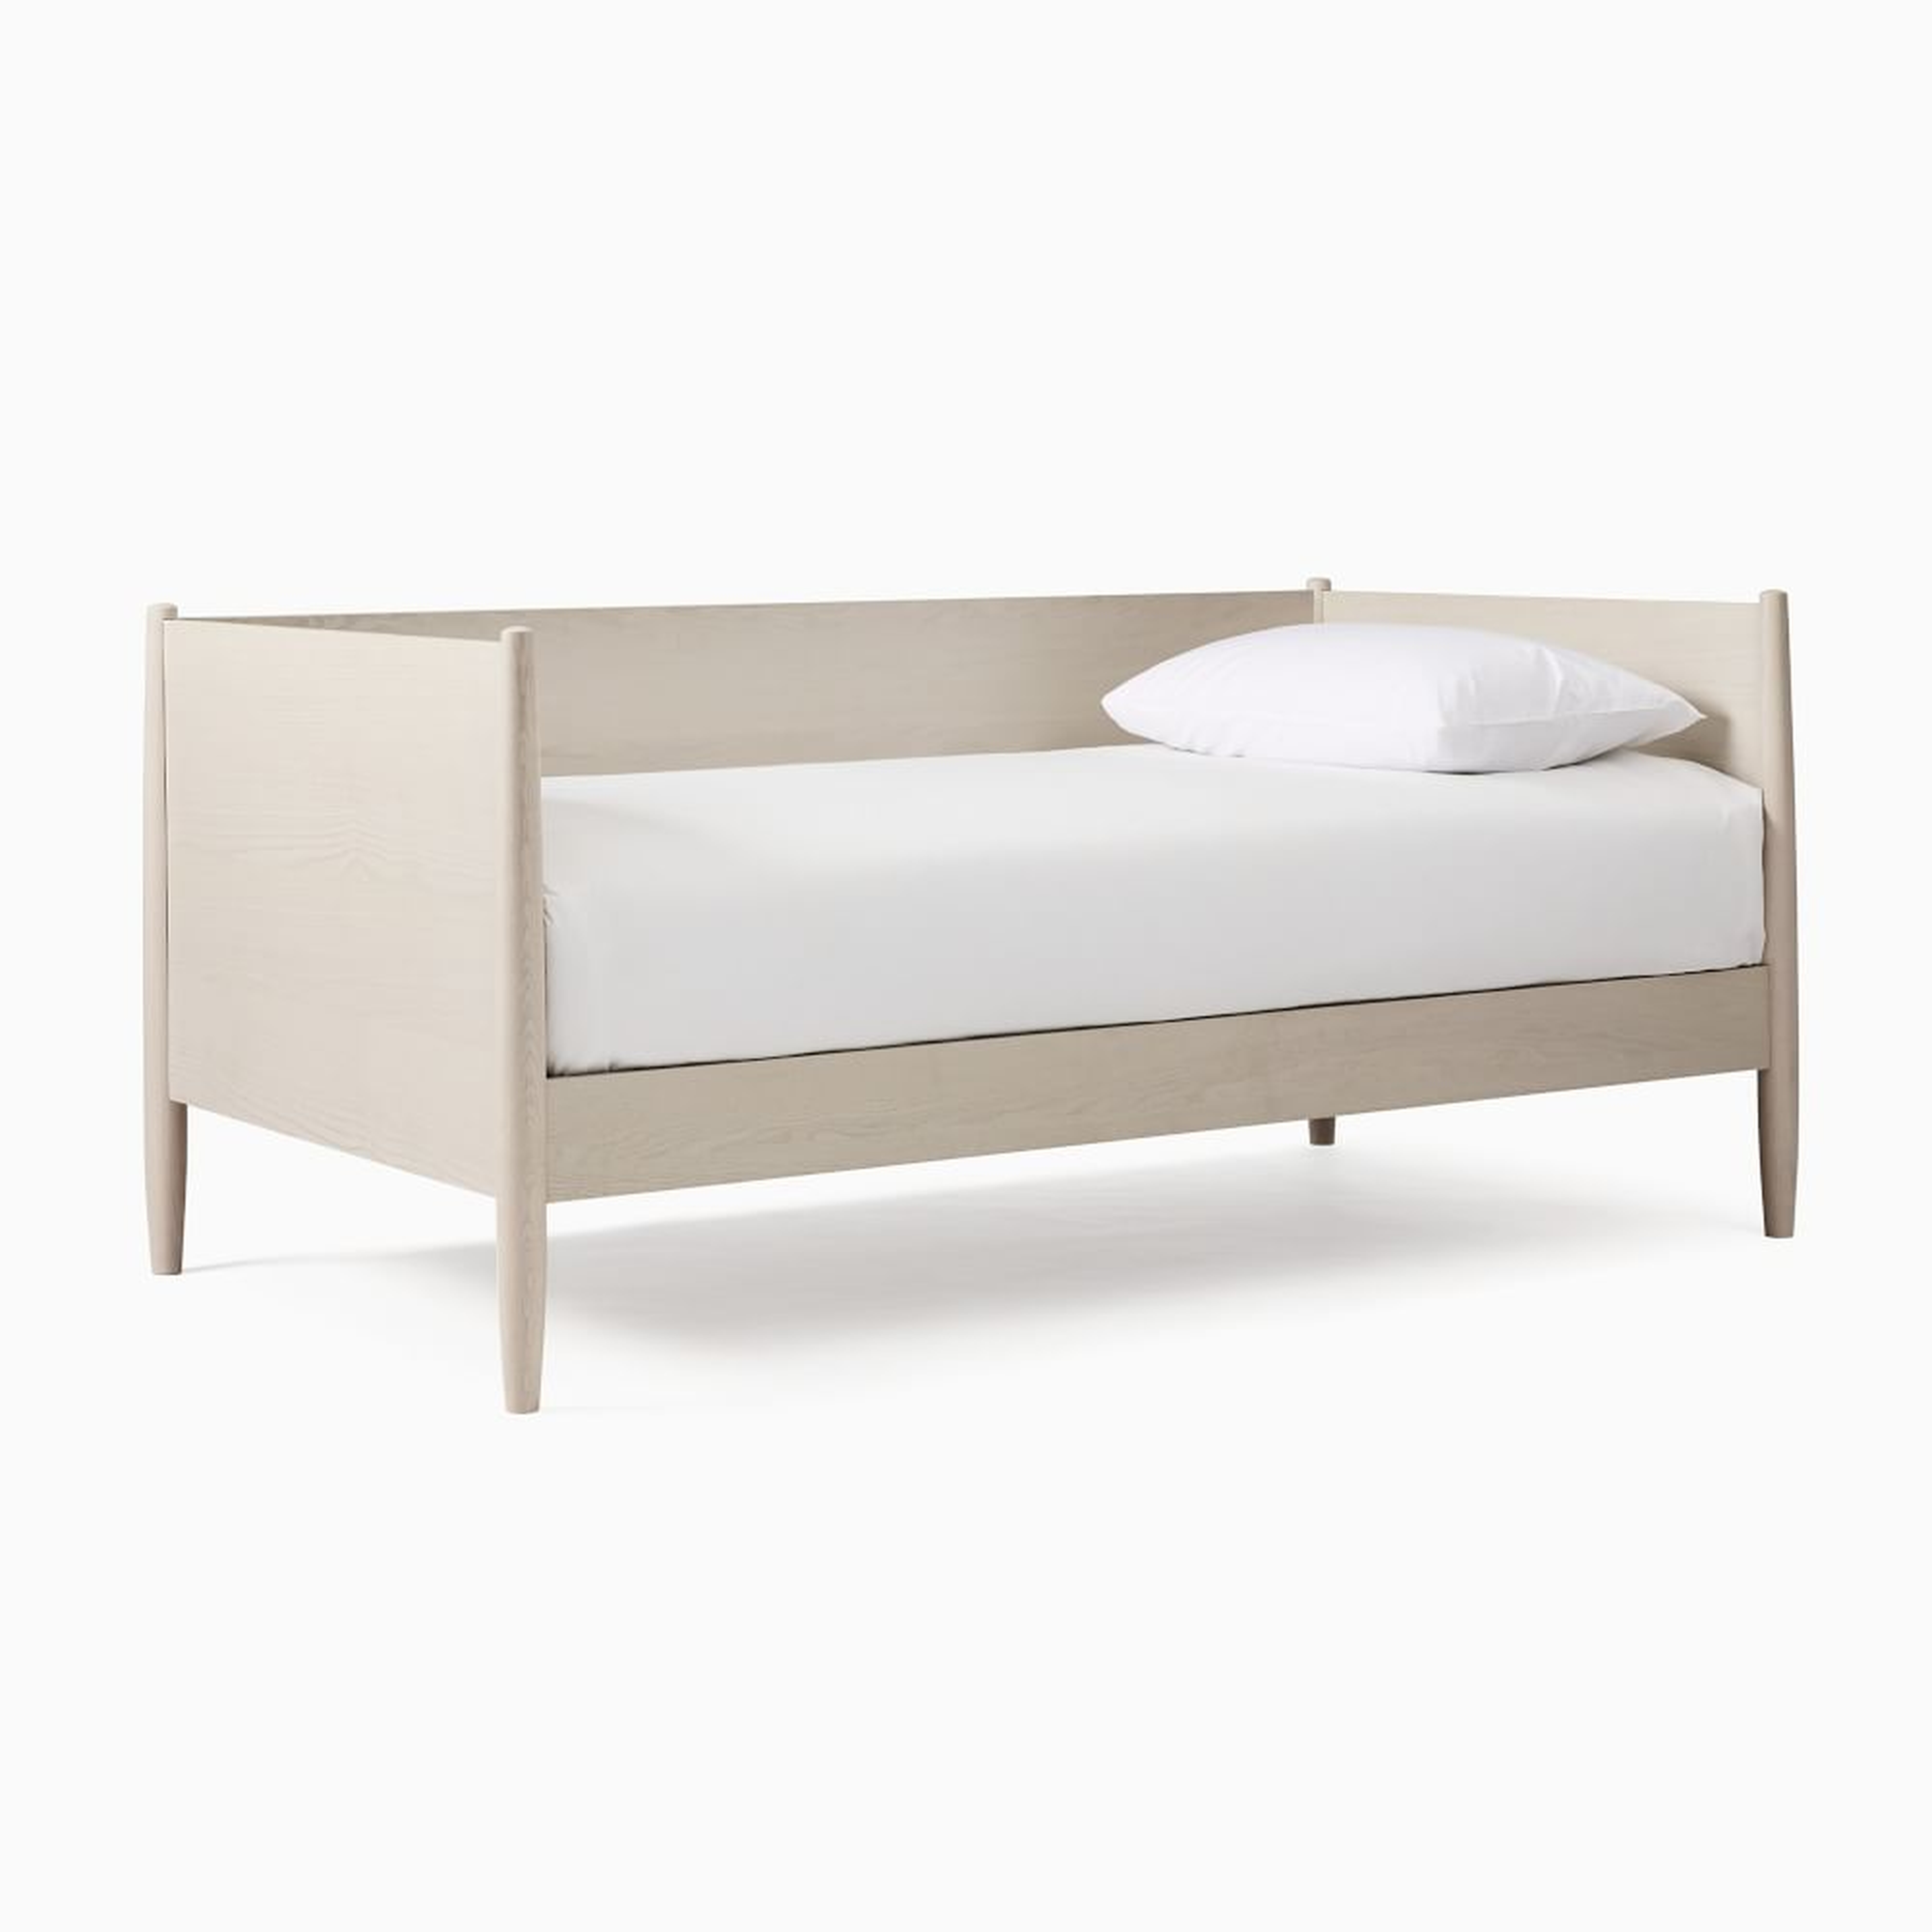 Midcentury Daybed, Pebble - West Elm